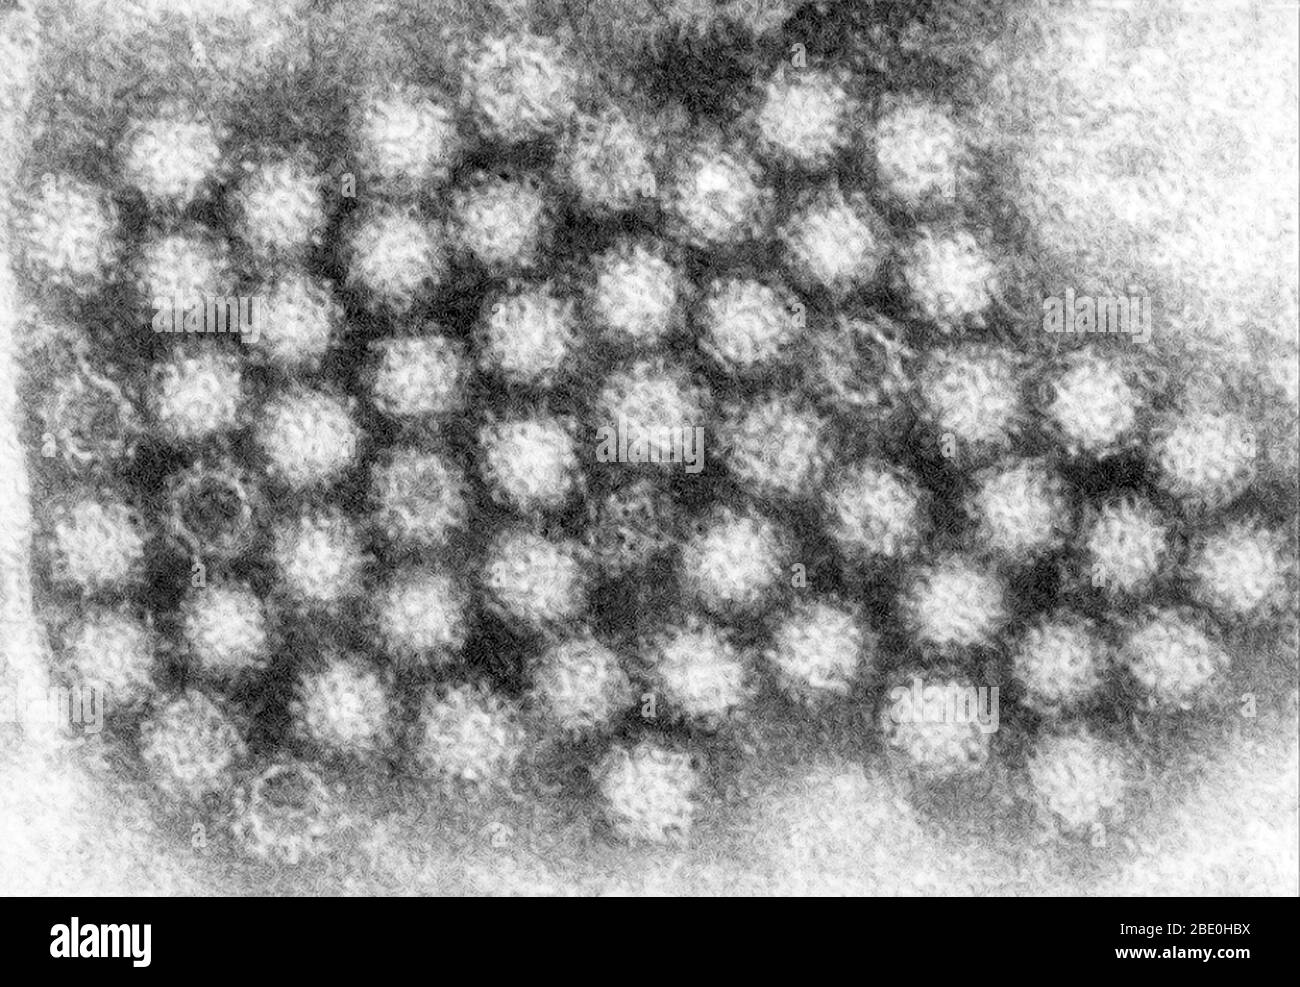 This transmission electron micrograph (TEM) revealed some of the ultrastructural morphology displayed by norovirus virions, or virus particles. Noroviruses belong to the genus Norovirus, and the family Caliciviridae. They are a group of related, single-stranded RNA, nonenveloped viruses that cause acute gastroenteritis in humans. Norovirus was recently approved as the official genus name for the group of viruses provisionally described as Norwalk-like viruses (NLV). Stock Photo